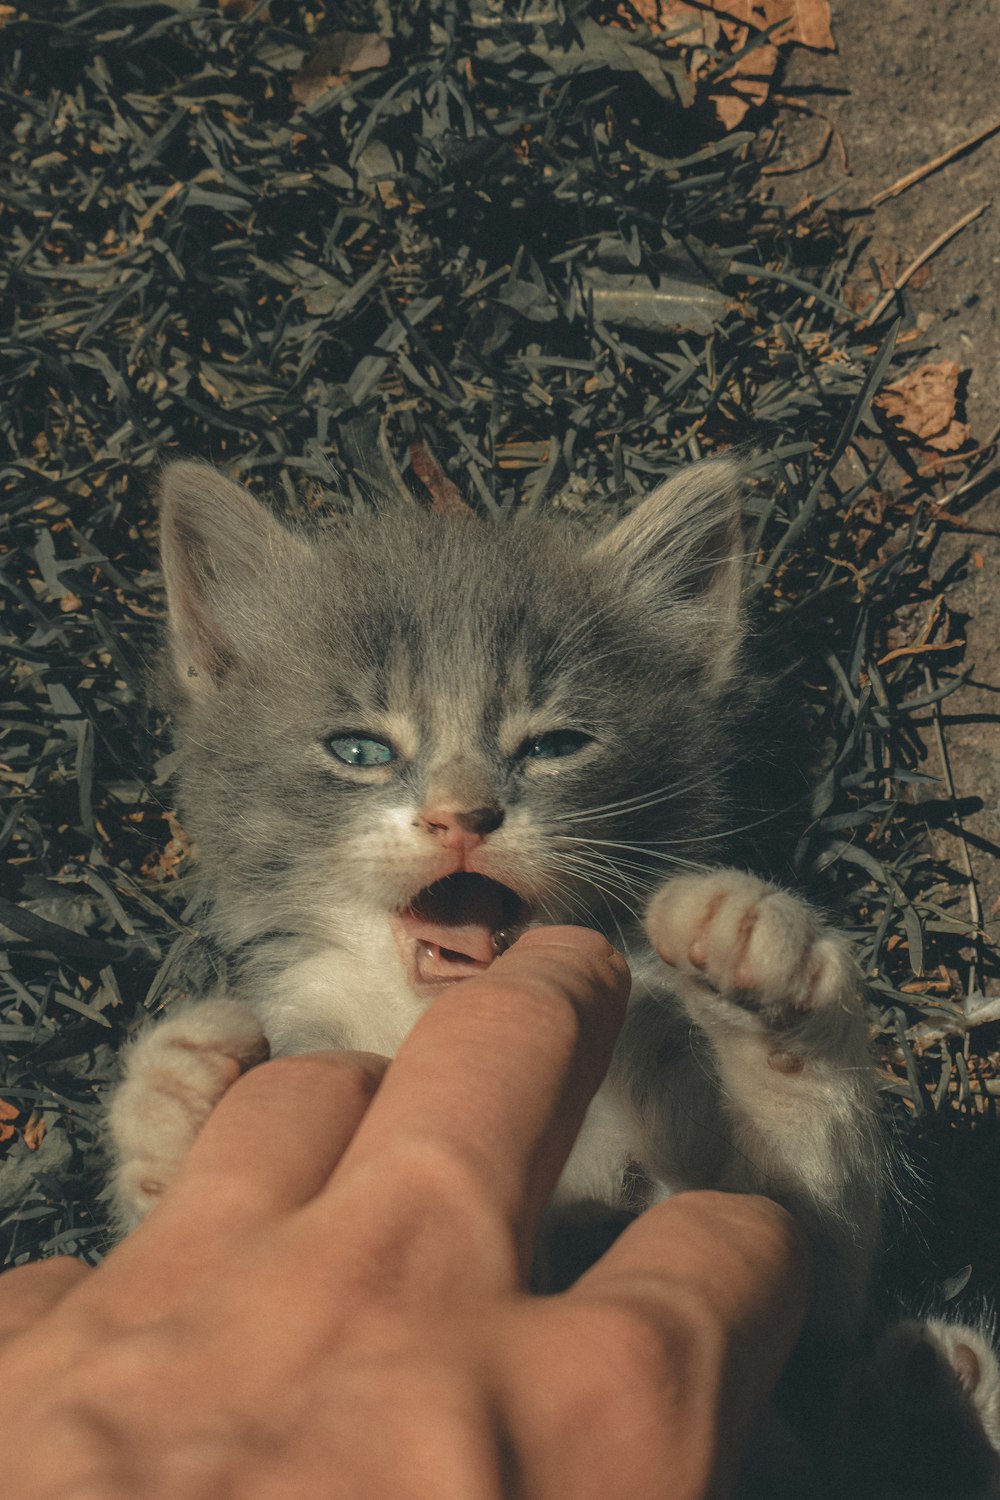 person holding gray and white cat